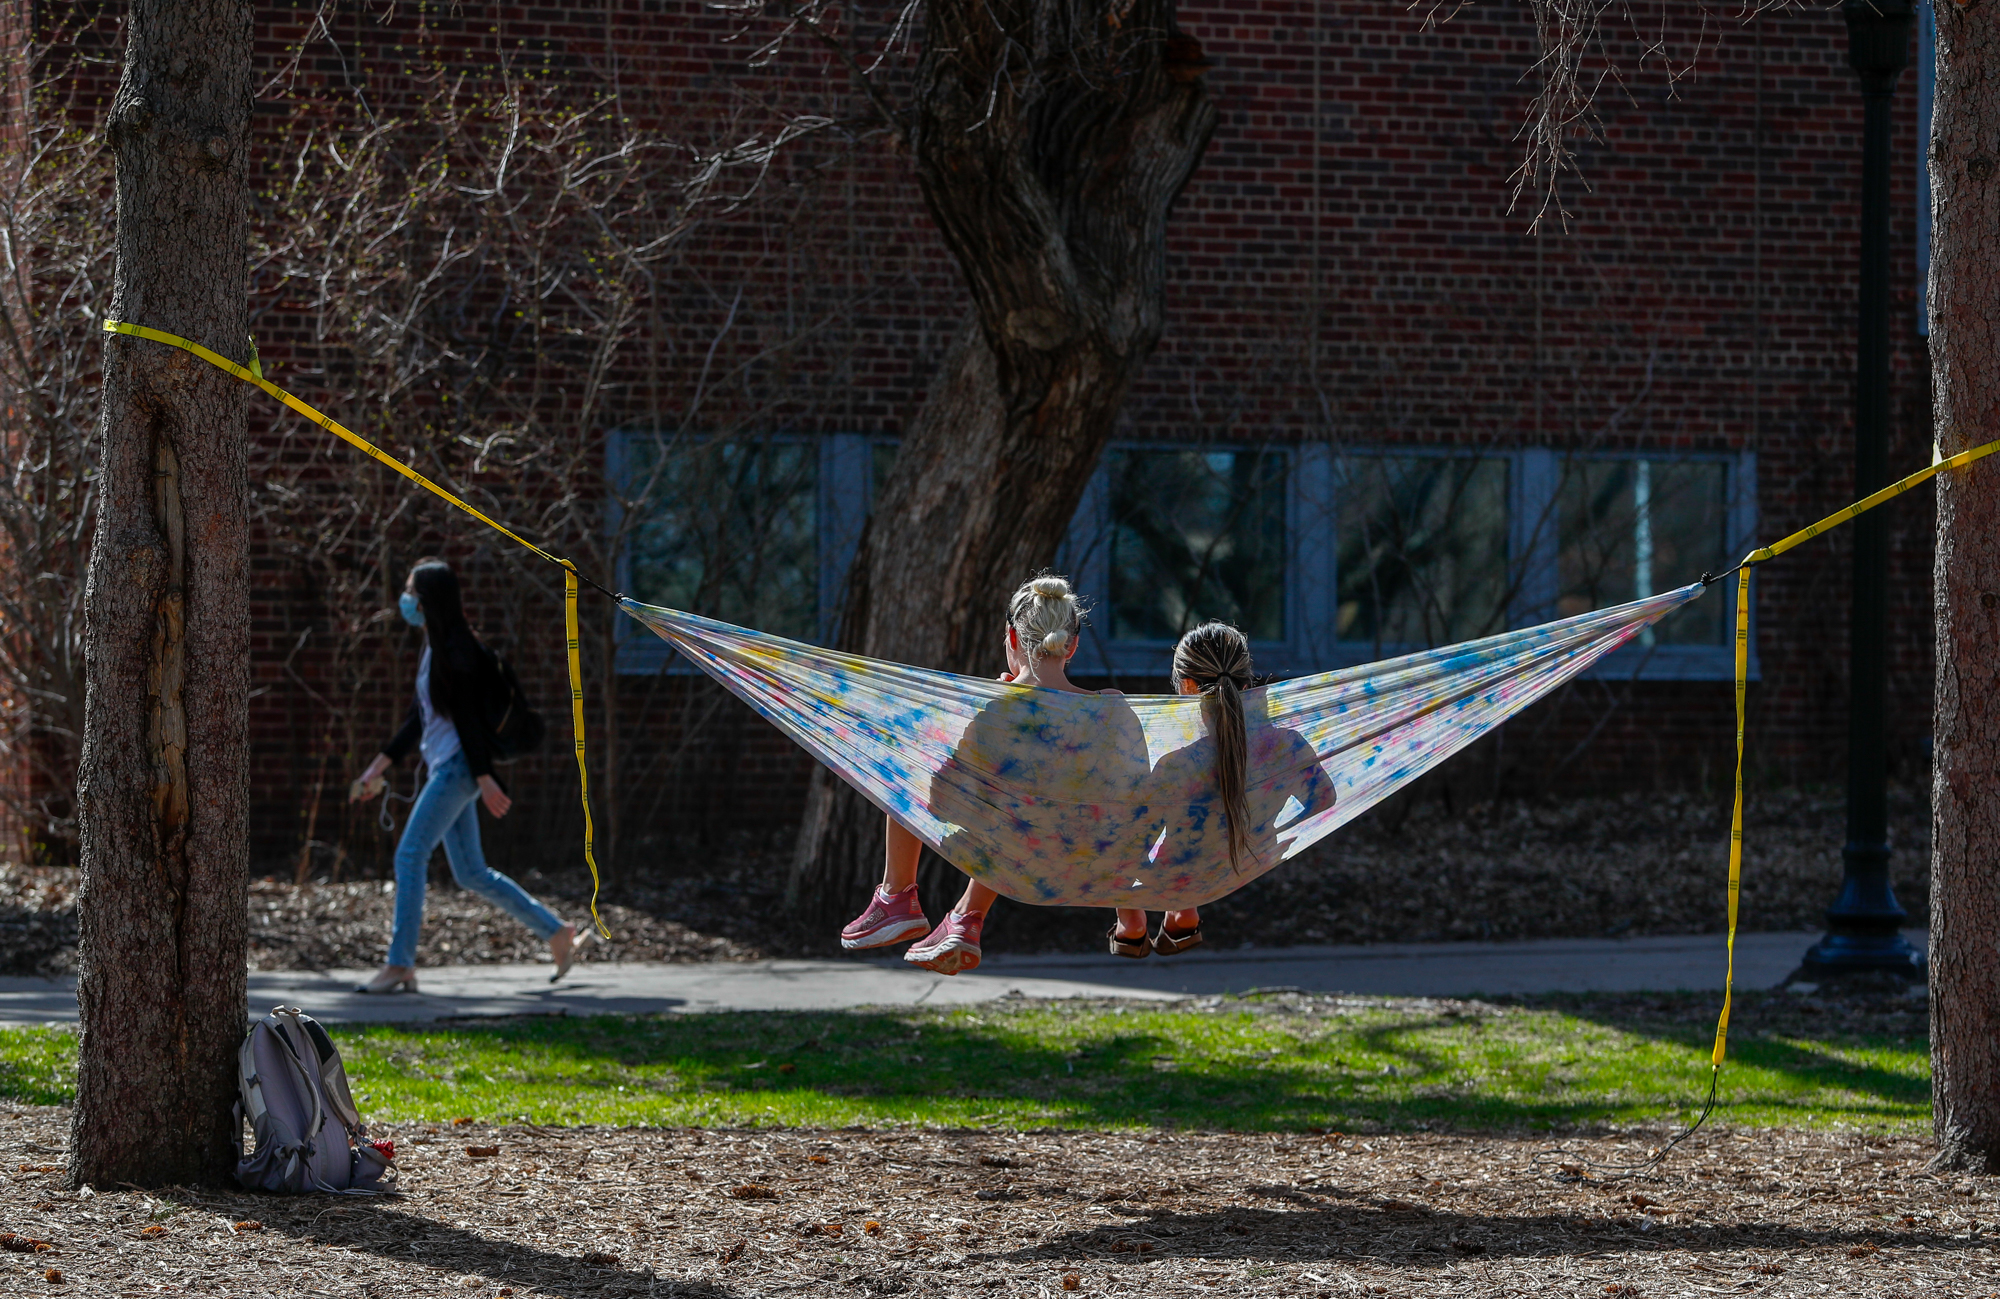 Students on campus in a hammock